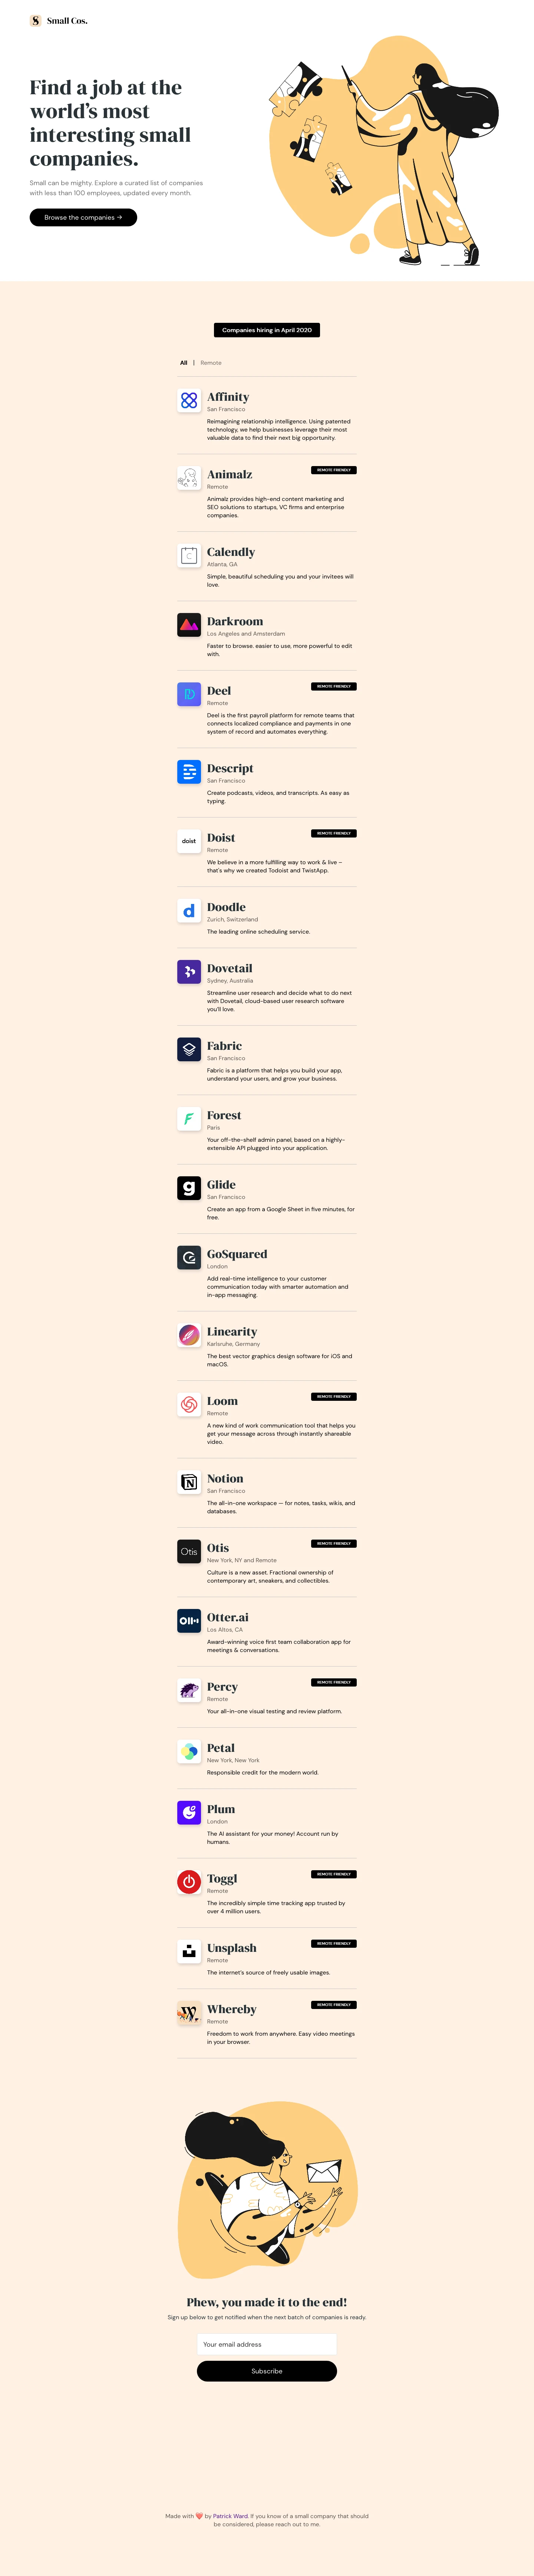 Small Cos. Landing Page Example: Find a job at the world’s most interesting small companies. Small can be mighty. Explore a curated list of companies with less than 100 employees, updated every month.